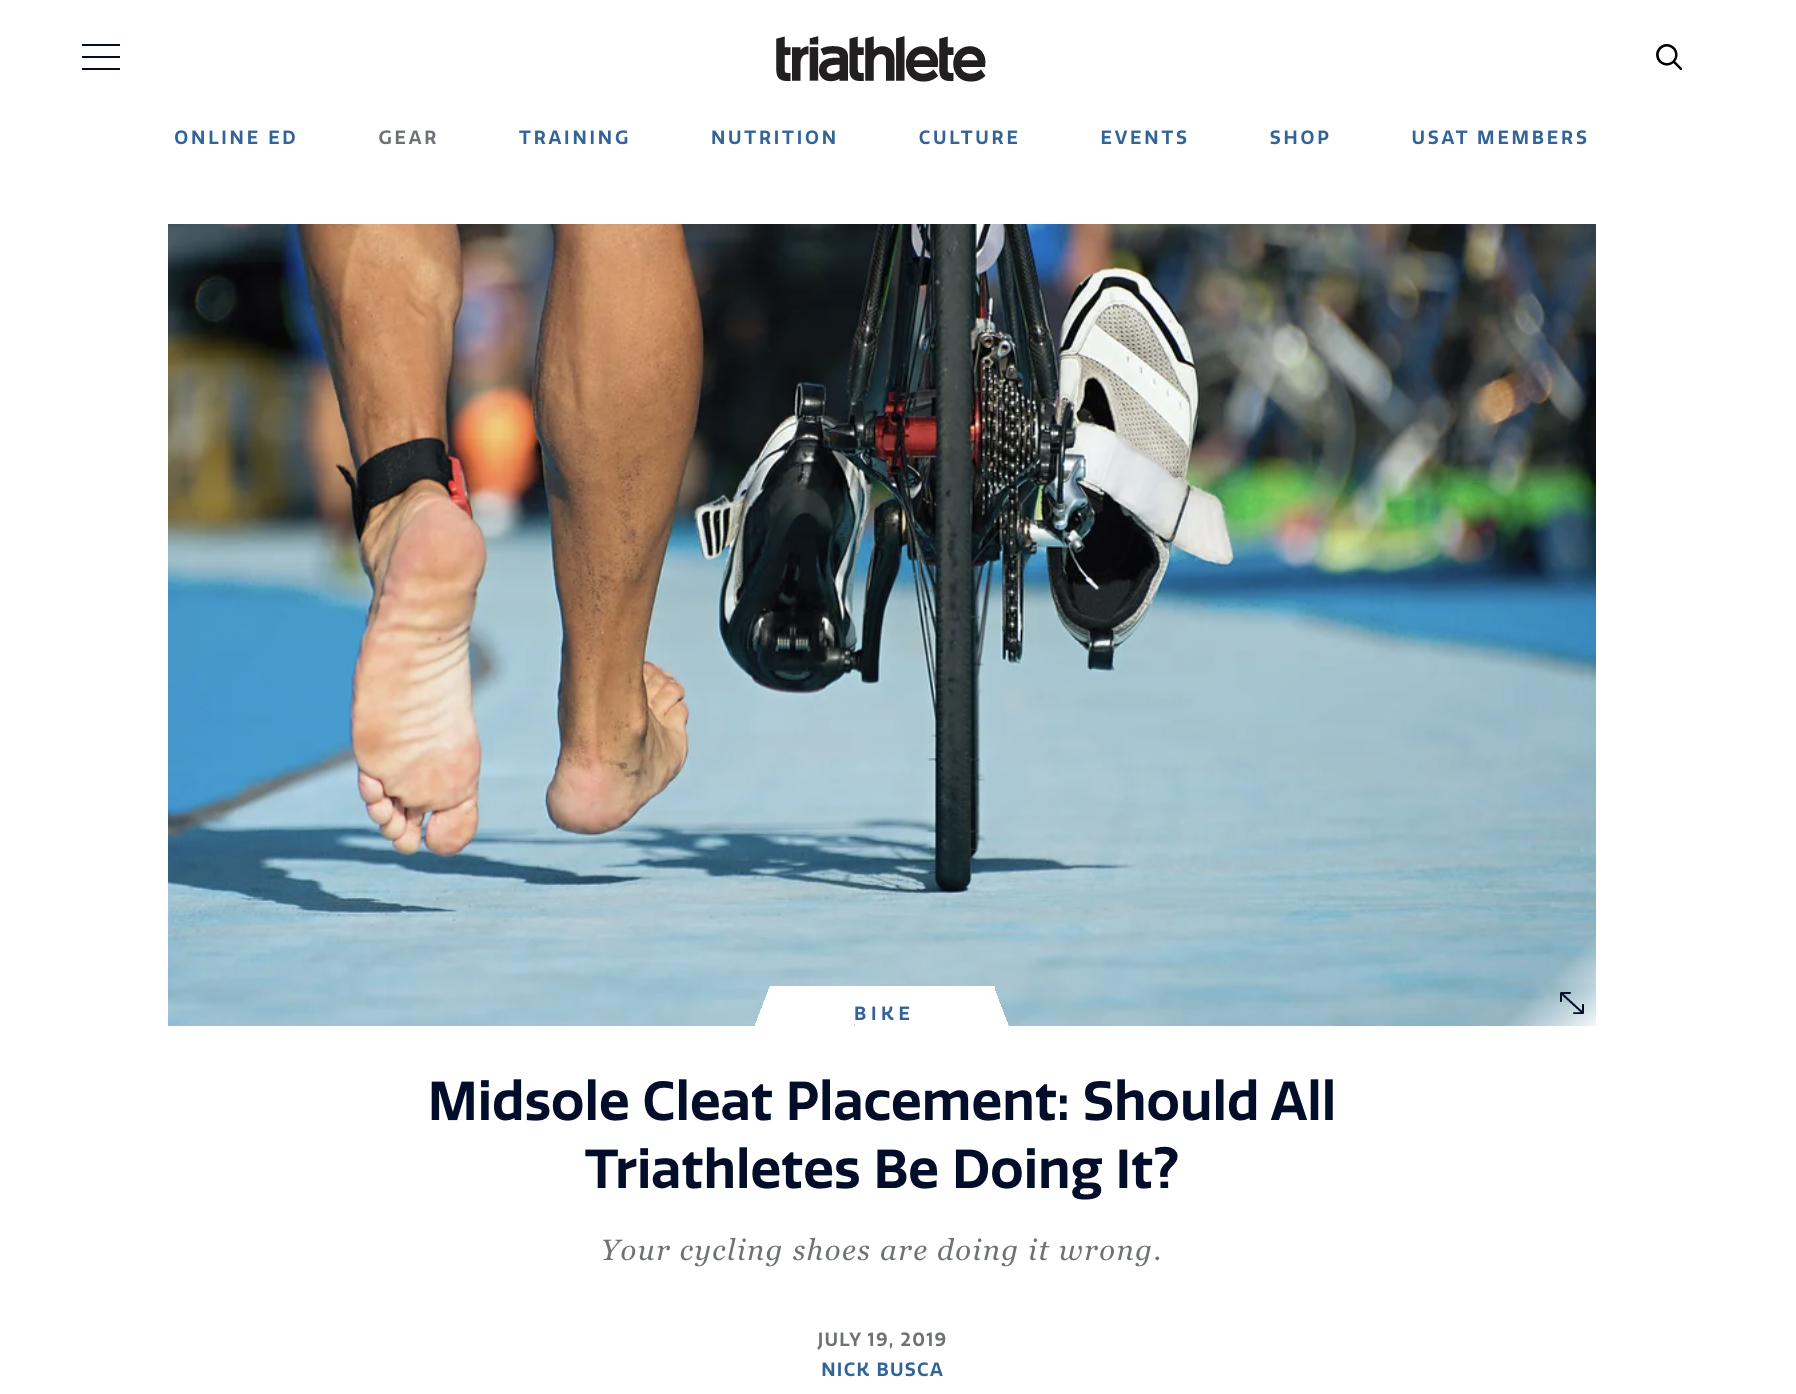 Midsole Cleat Placement: Should All Triathletes Be Doing It?